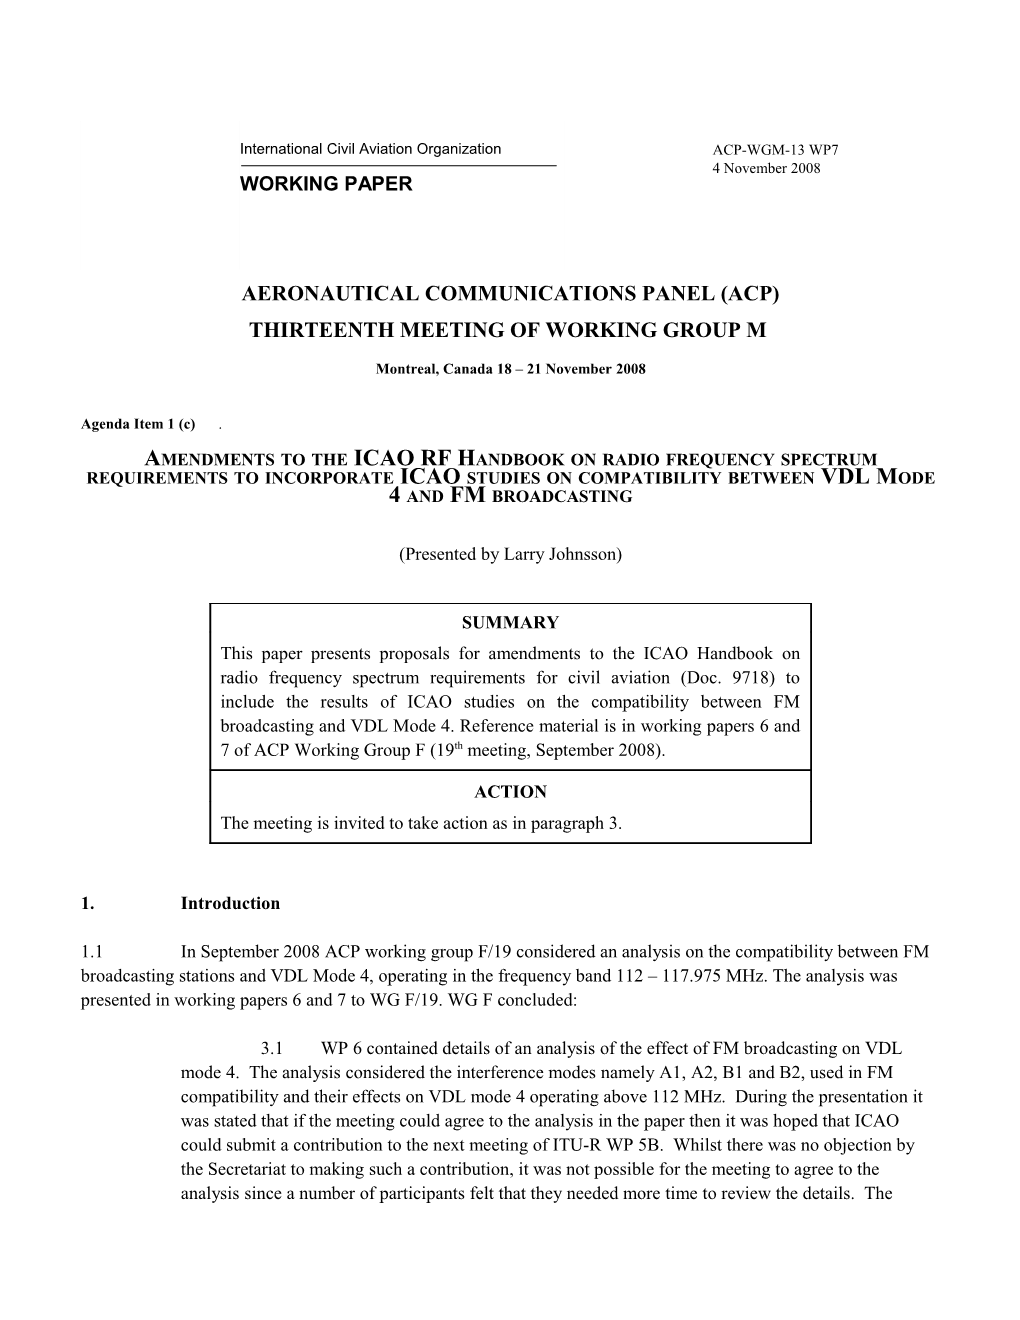 Amendments to the Icao Rf Handbook on Radio Frequency Spectrum Requirements to Incorporate